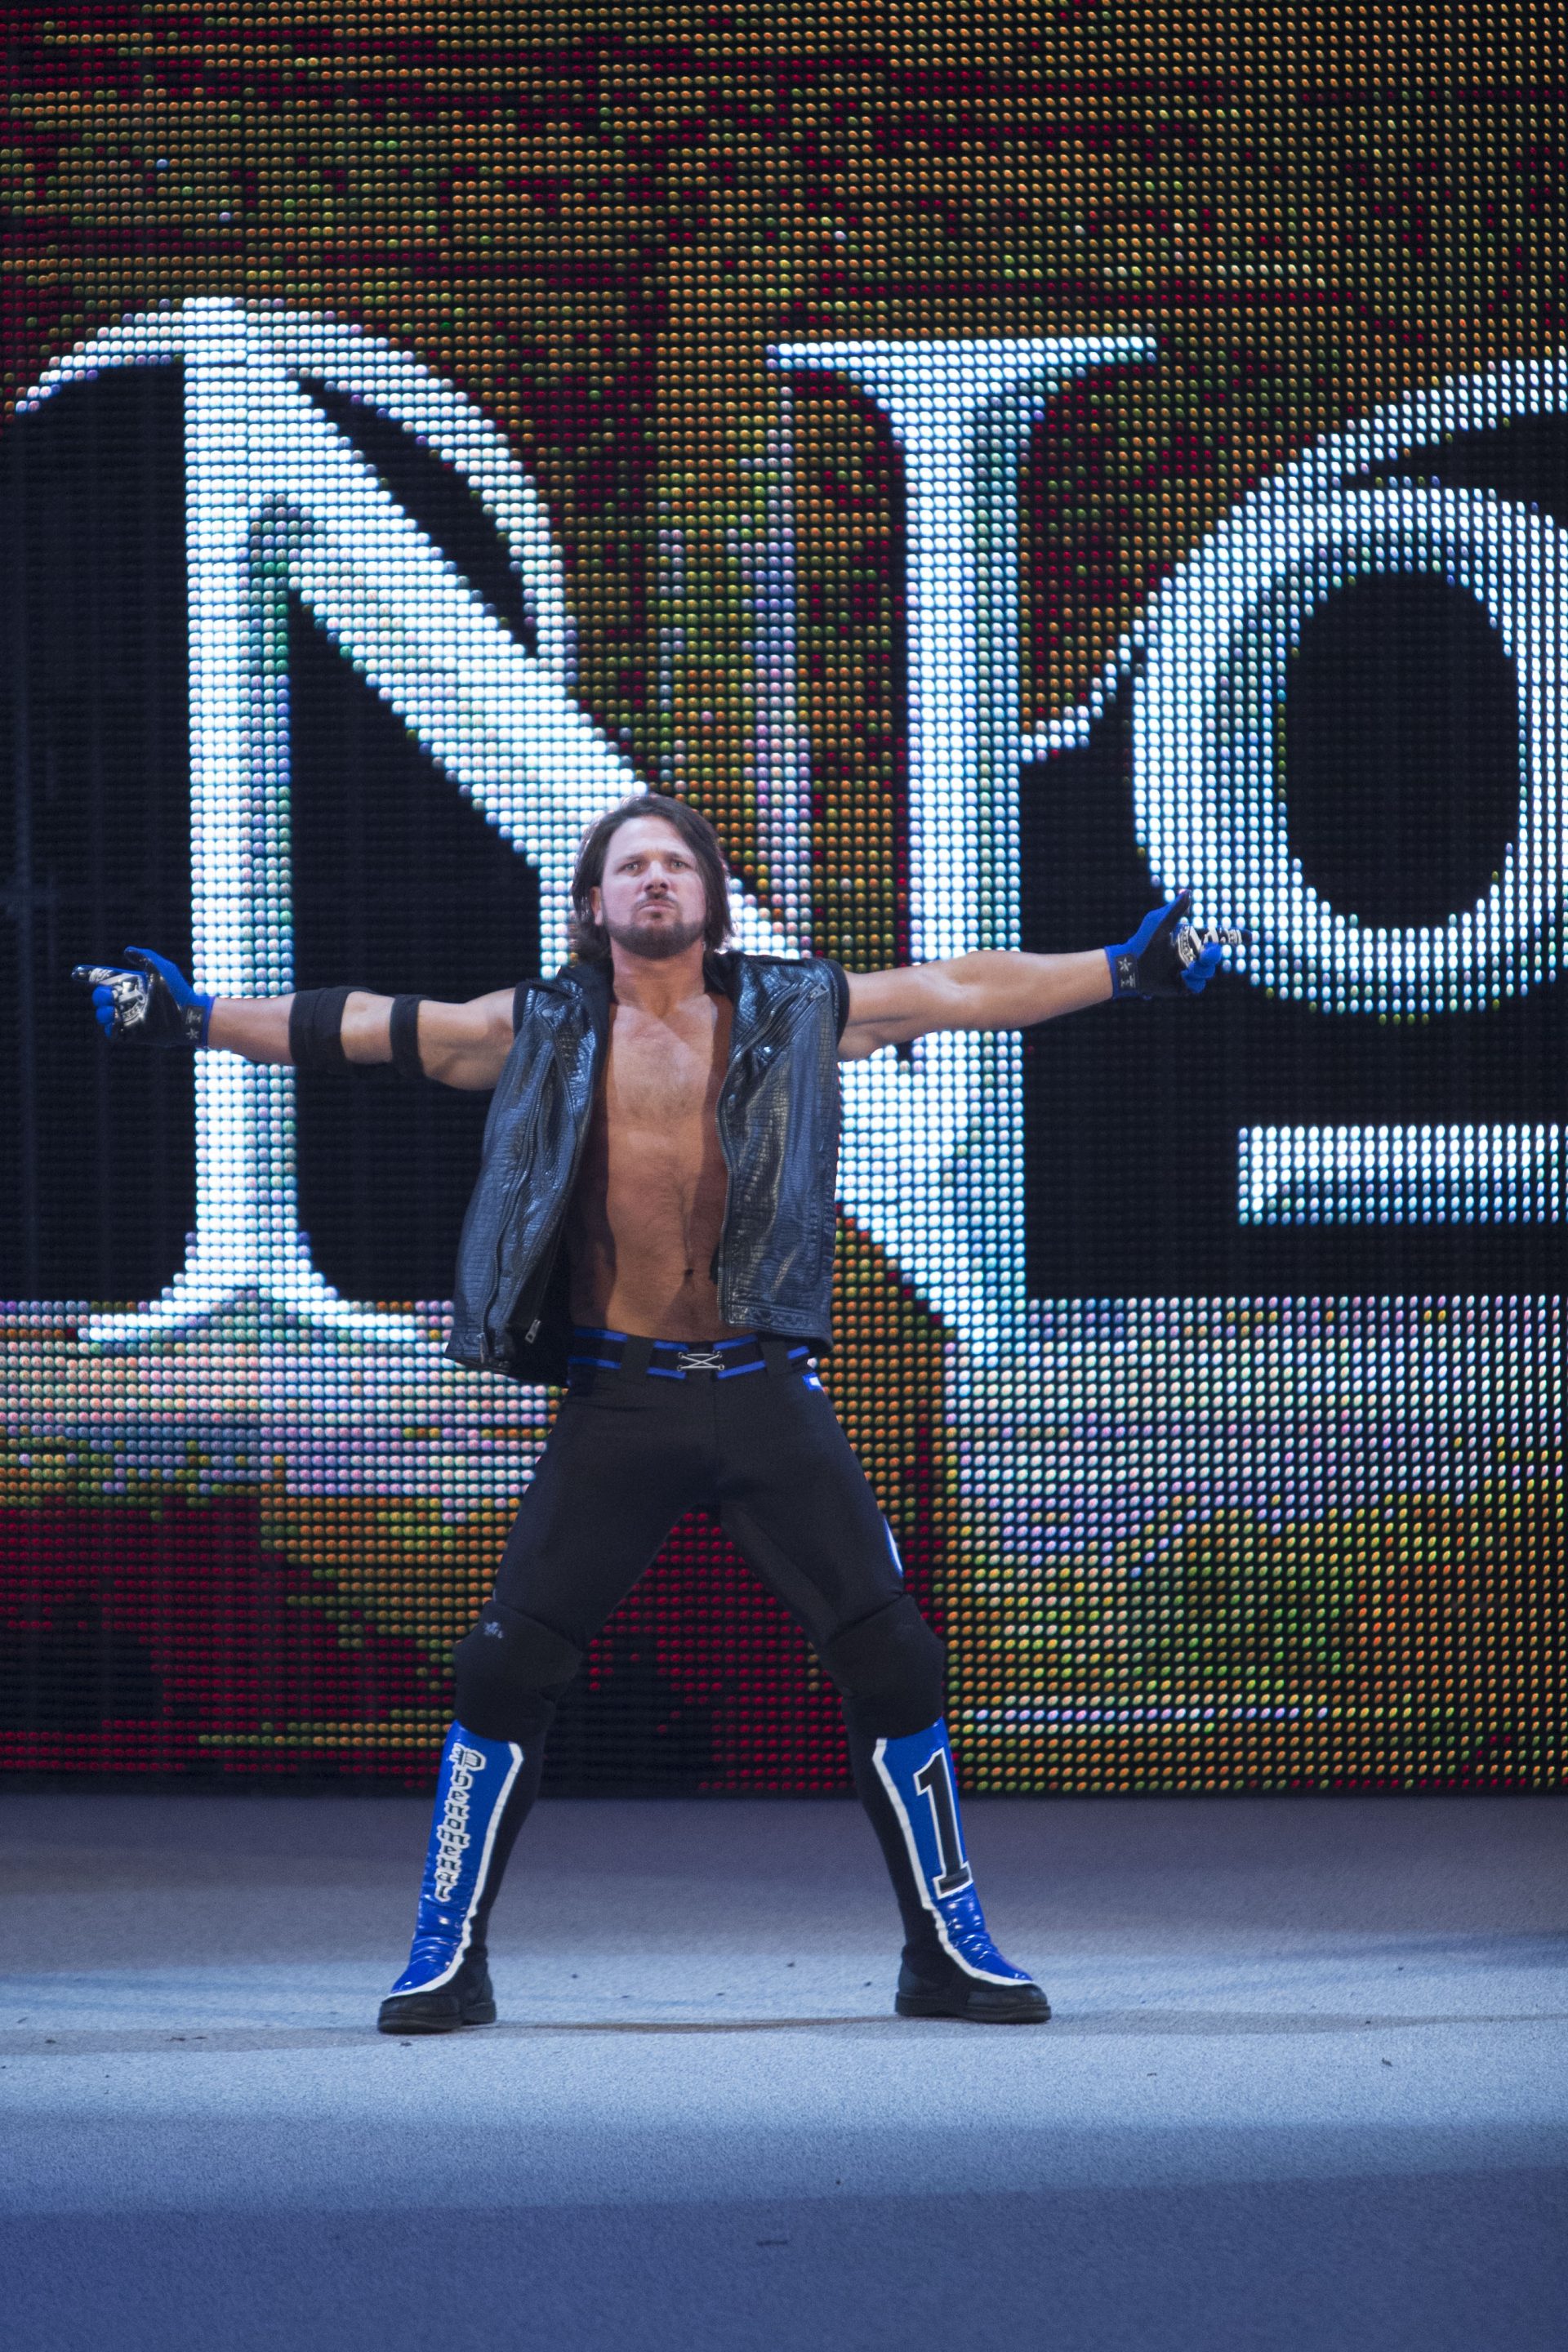 AJ Styles’ Lengthy, Consuming Race to the WWE Is Chronicled in Fine Recent Documentary